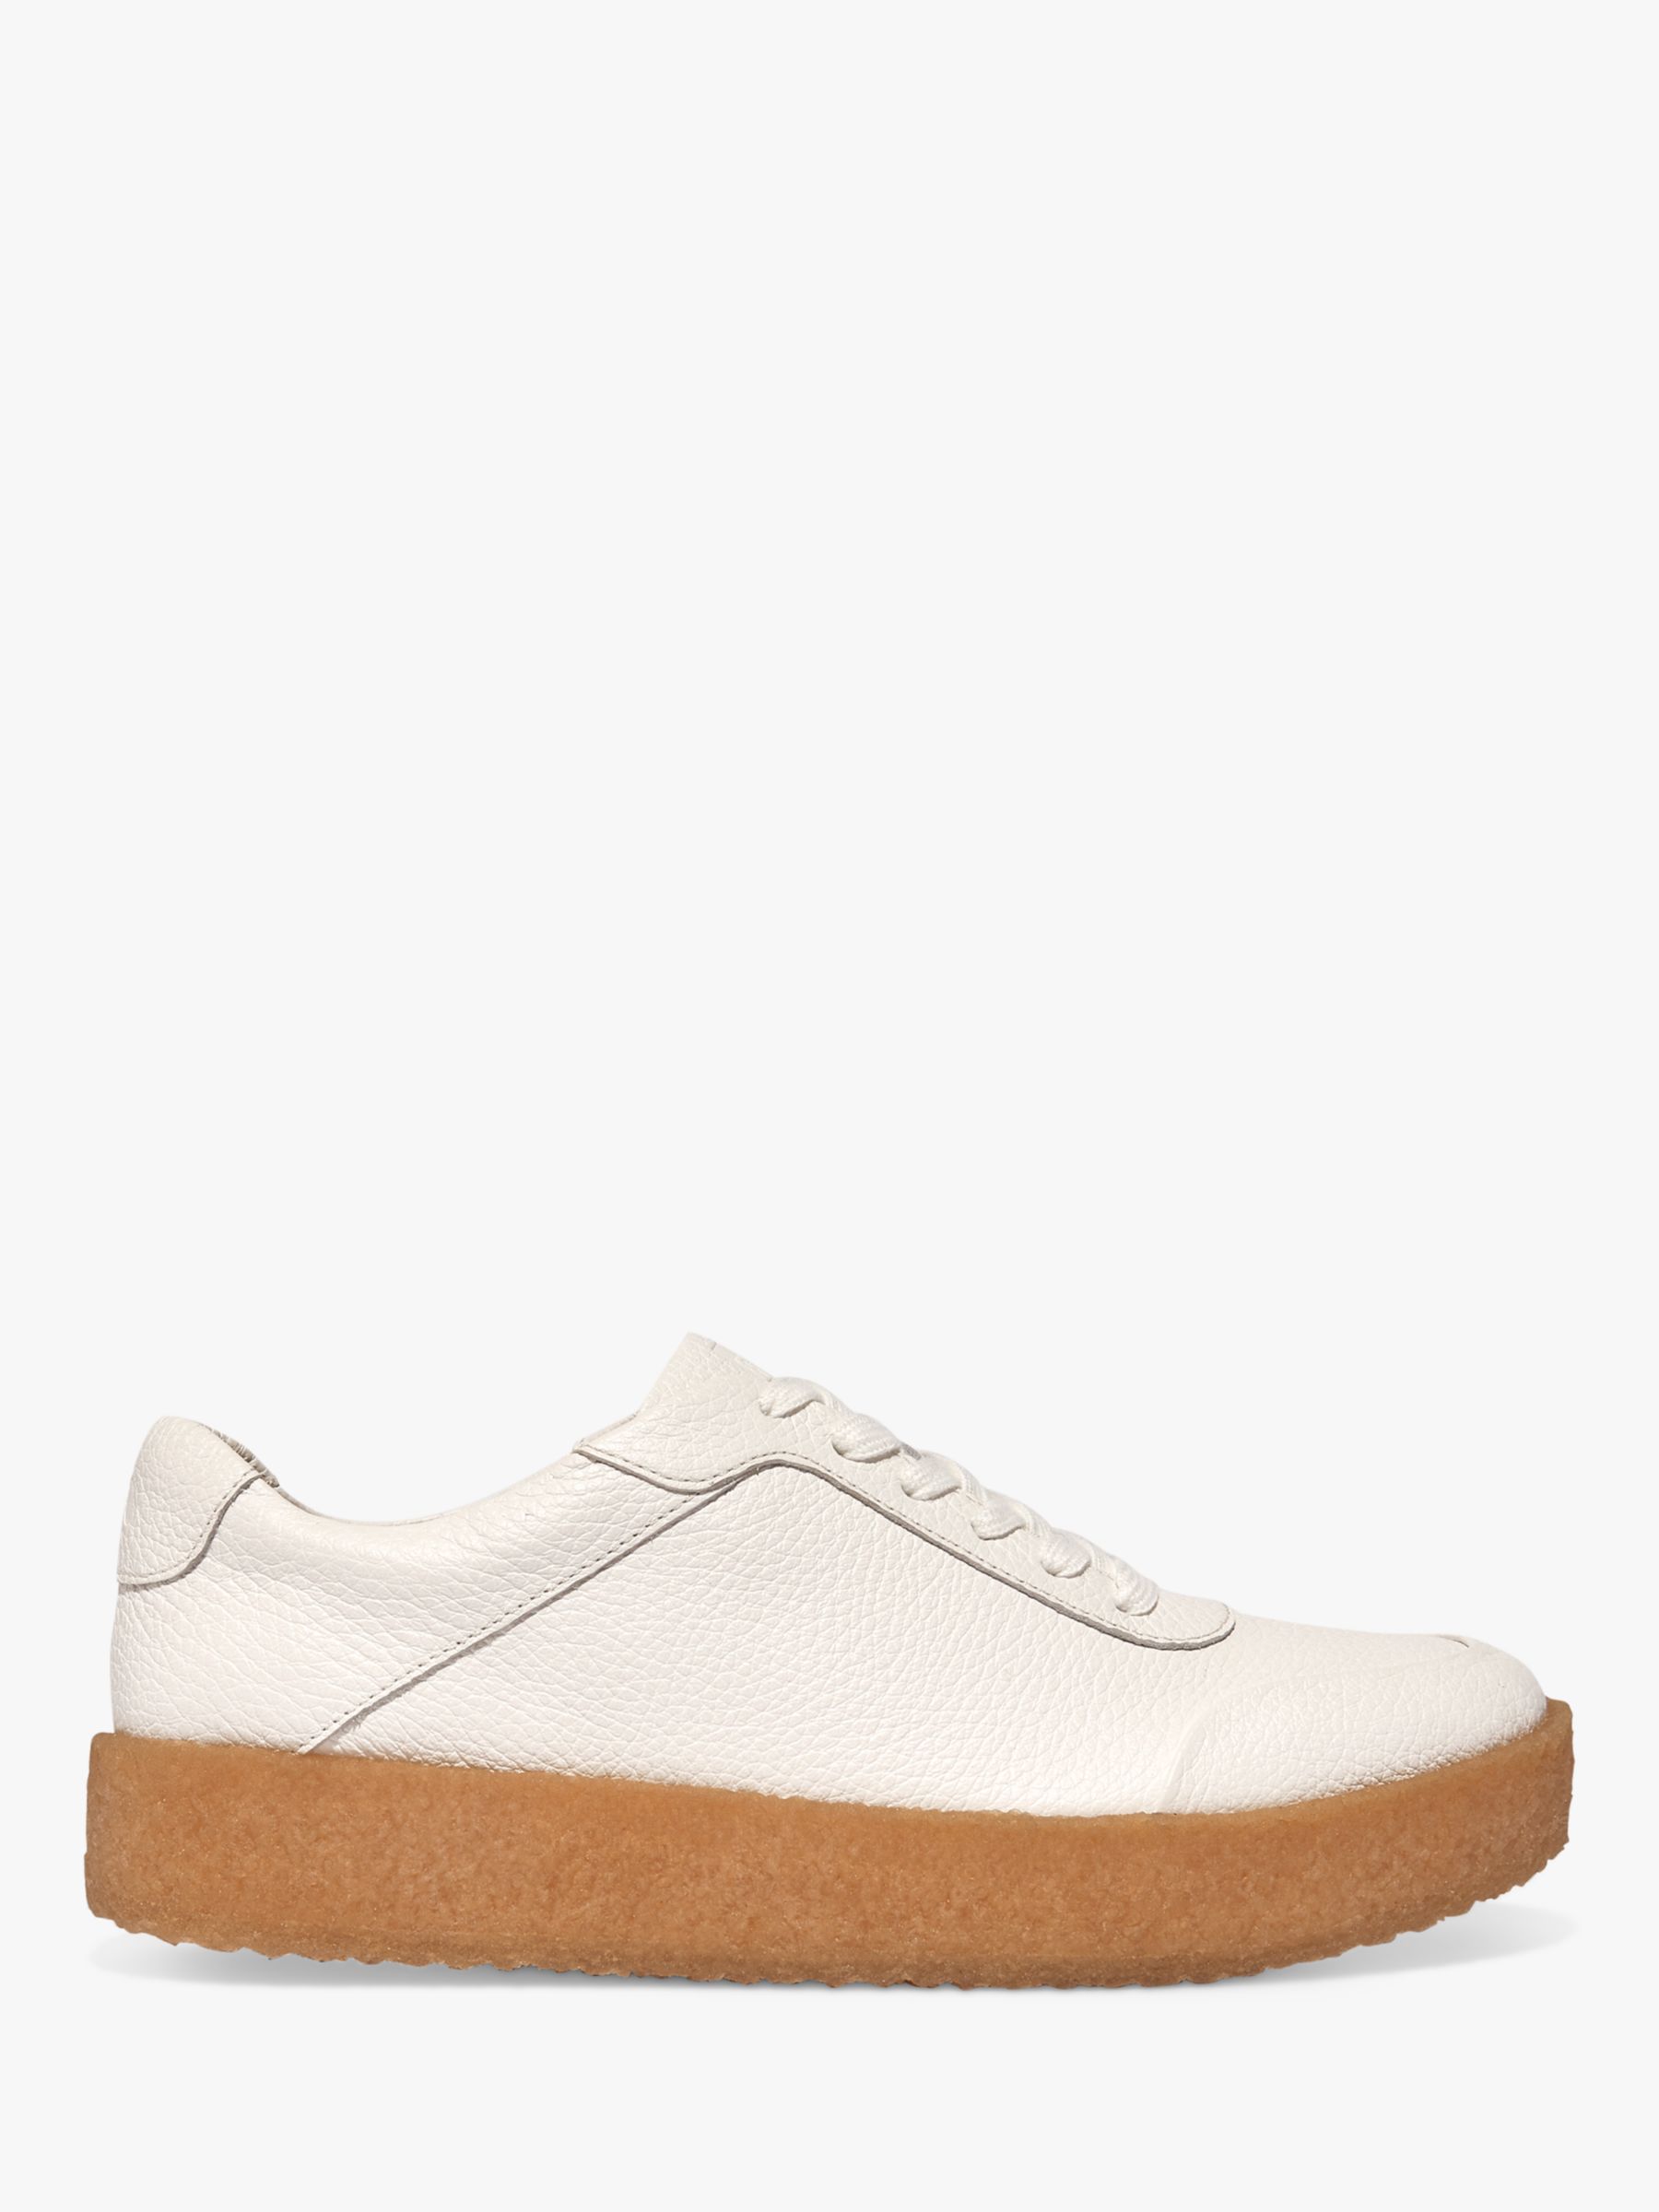 FitFlop Rally Crepe Leather Trainers, Urban White at John Lewis & Partners